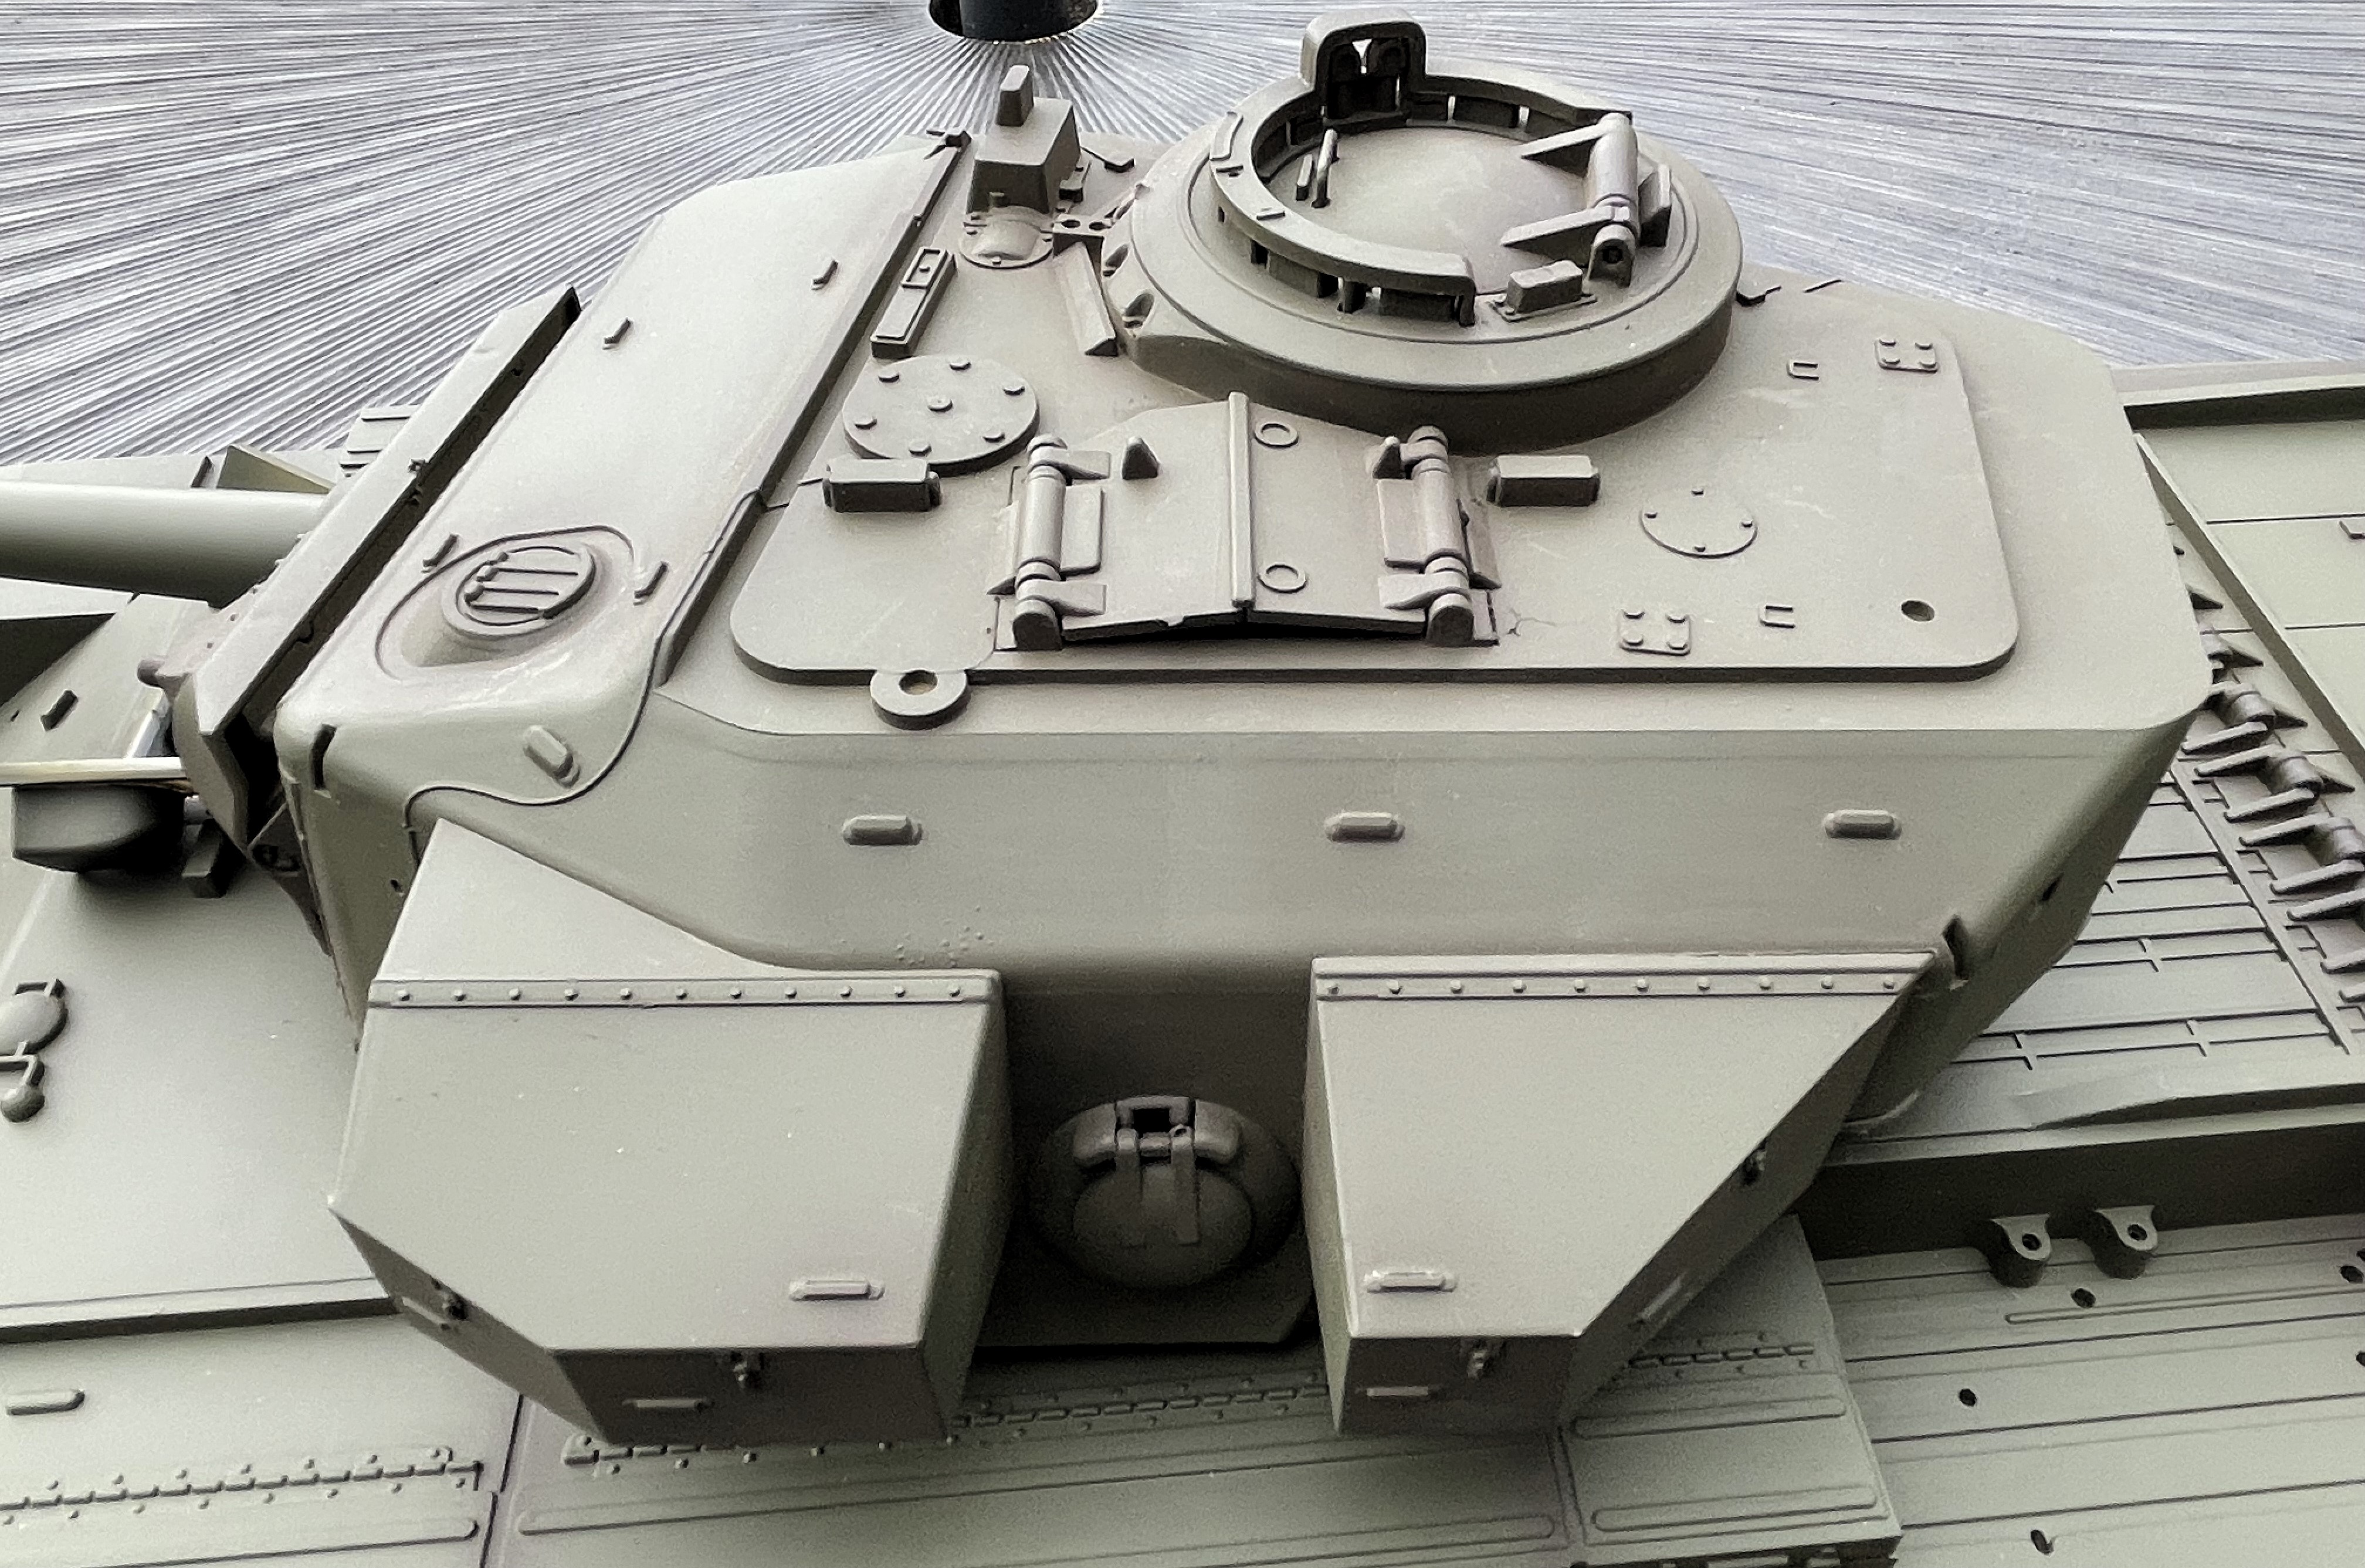 1/16 RC IDF Sho't Meteor Centurion with 105mm - build